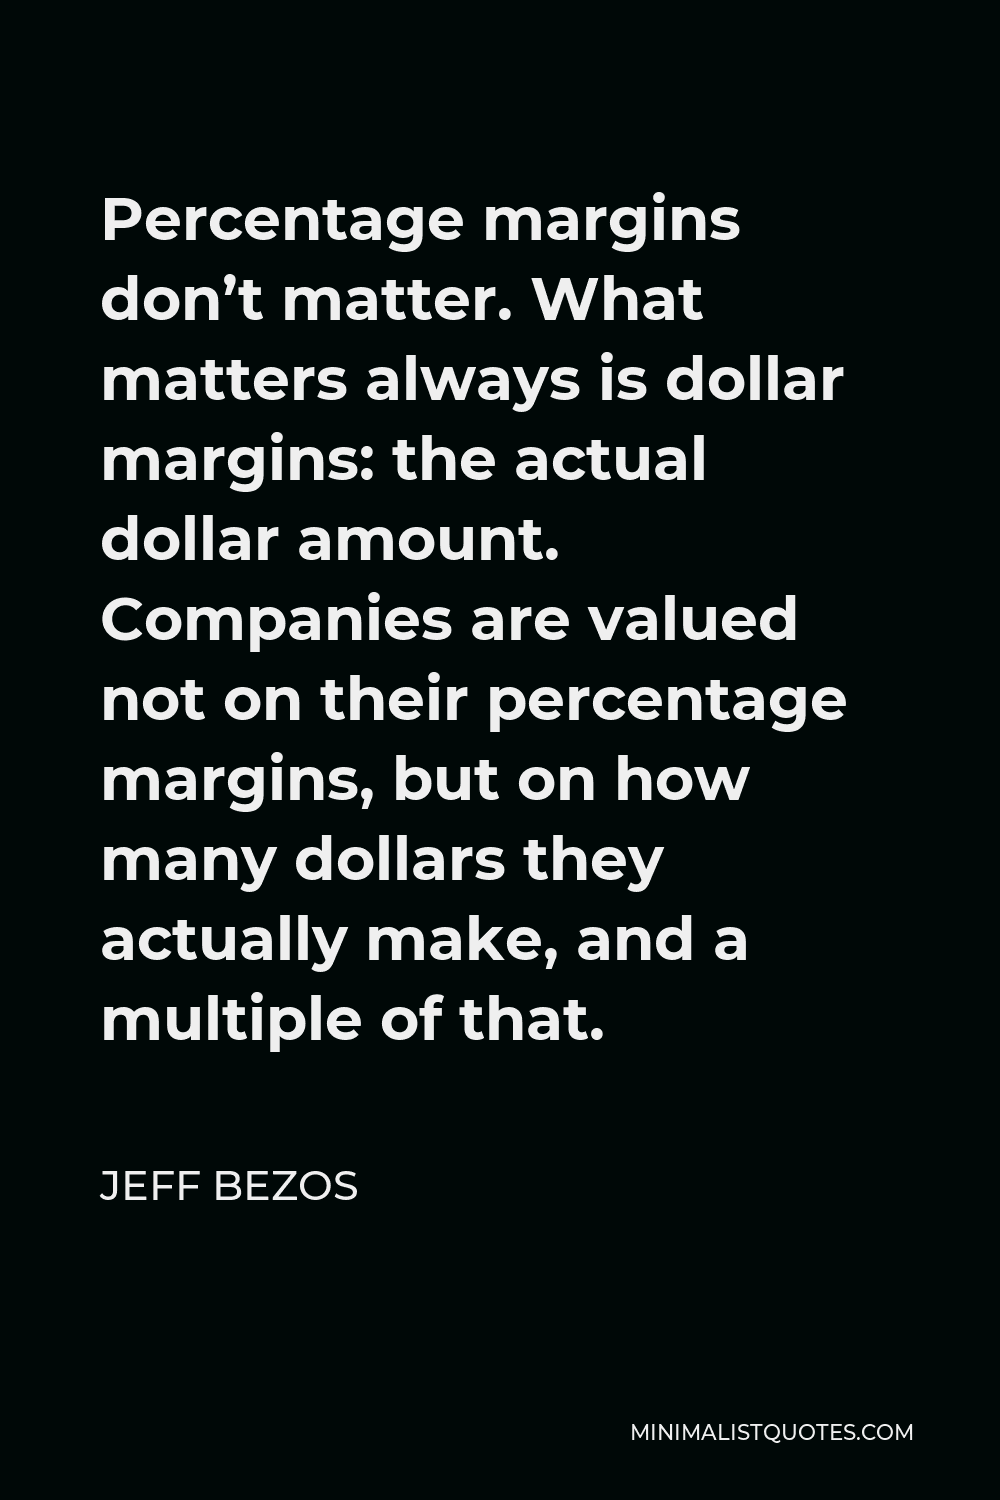 Jeff Bezos Quote - Percentage margins don’t matter. What matters always is dollar margins: the actual dollar amount. Companies are valued not on their percentage margins, but on how many dollars they actually make, and a multiple of that.